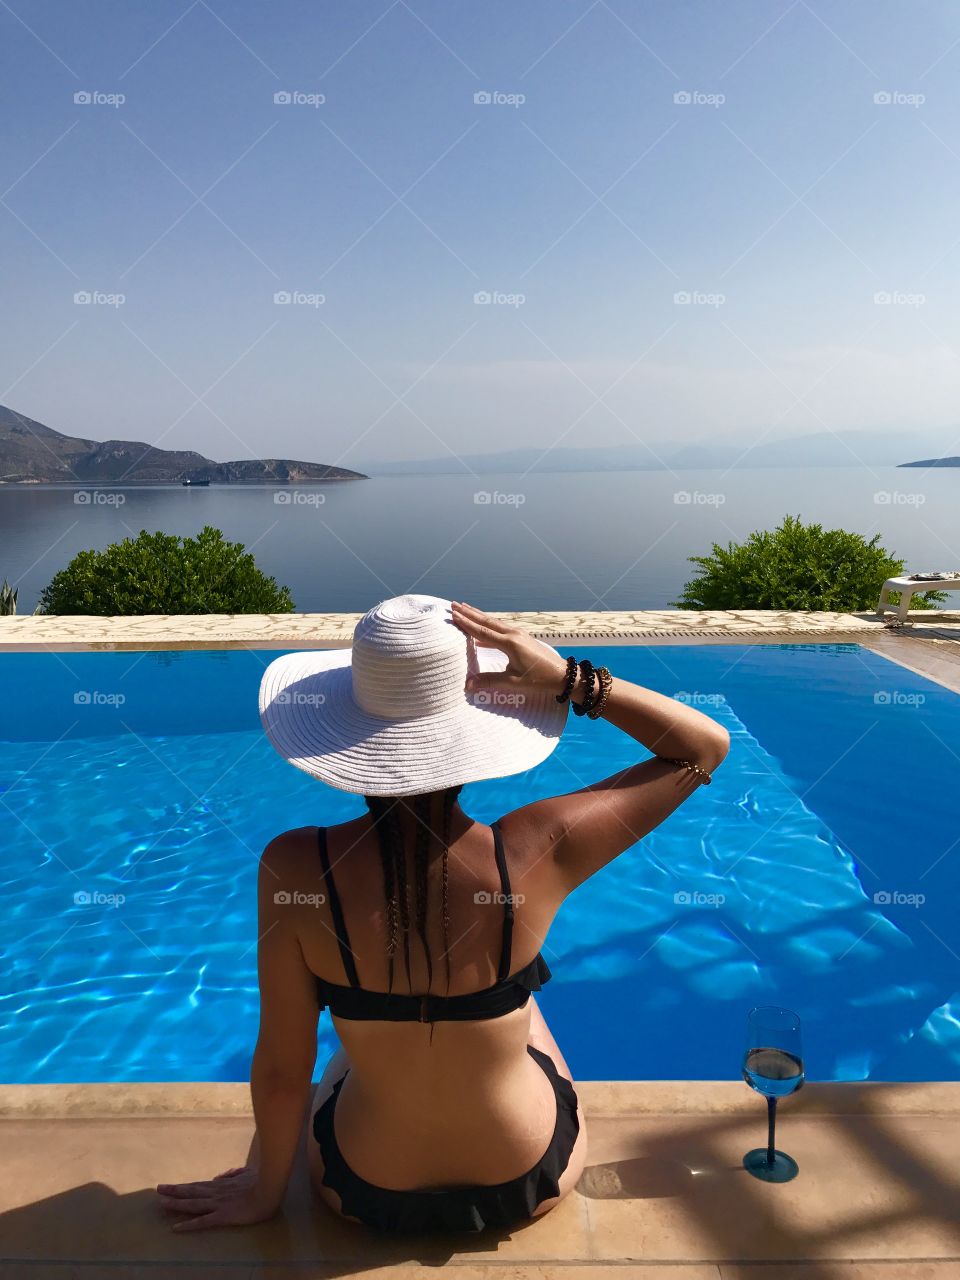 Woman with hat in a pool 